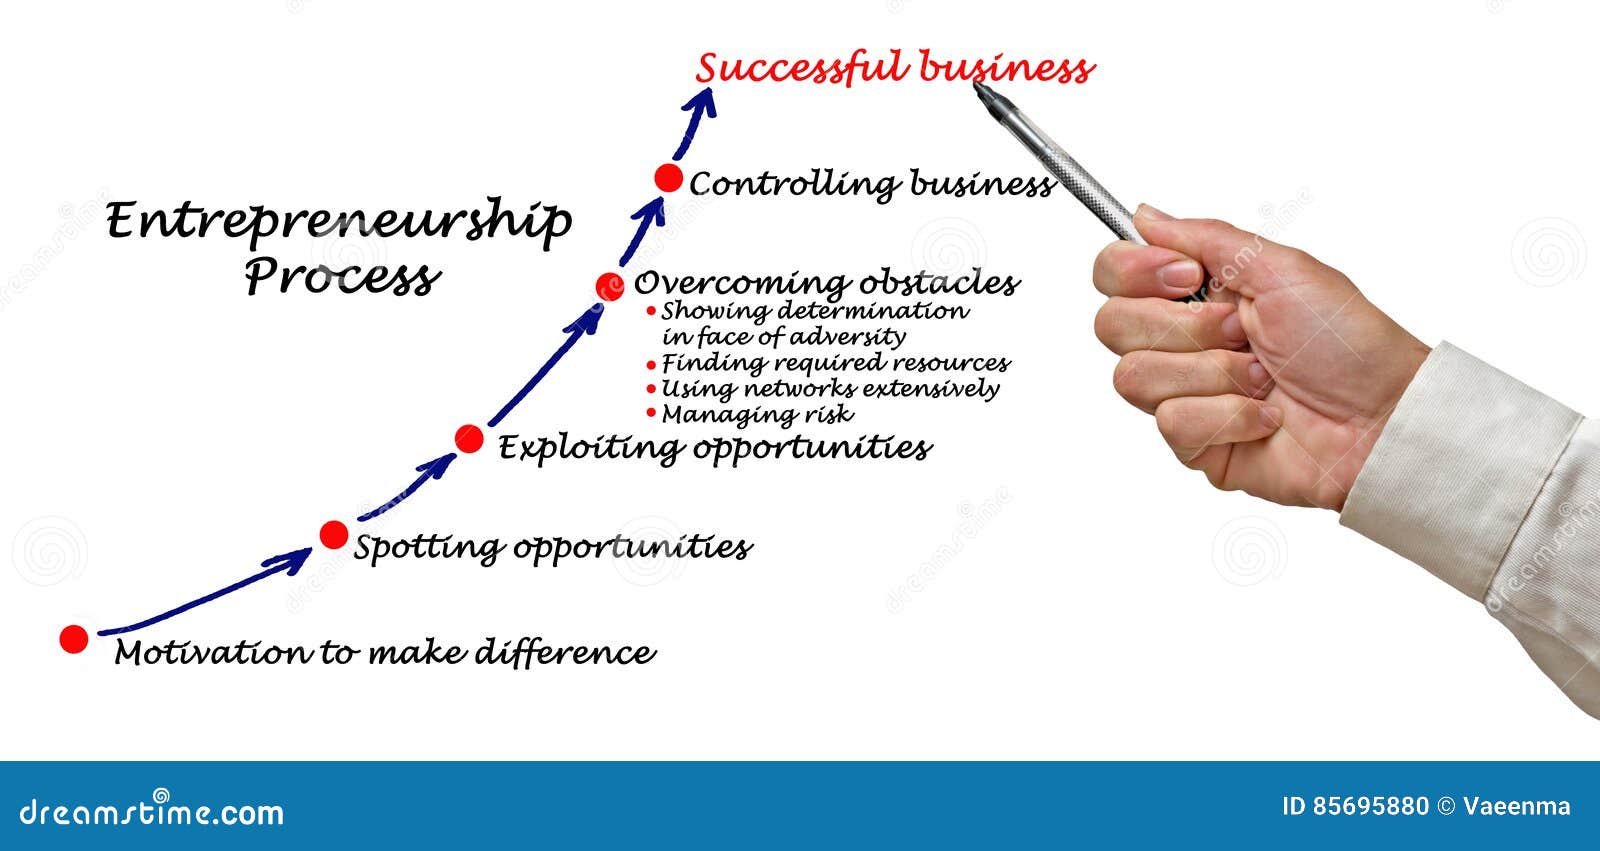 business planning process in entrepreneurship notes